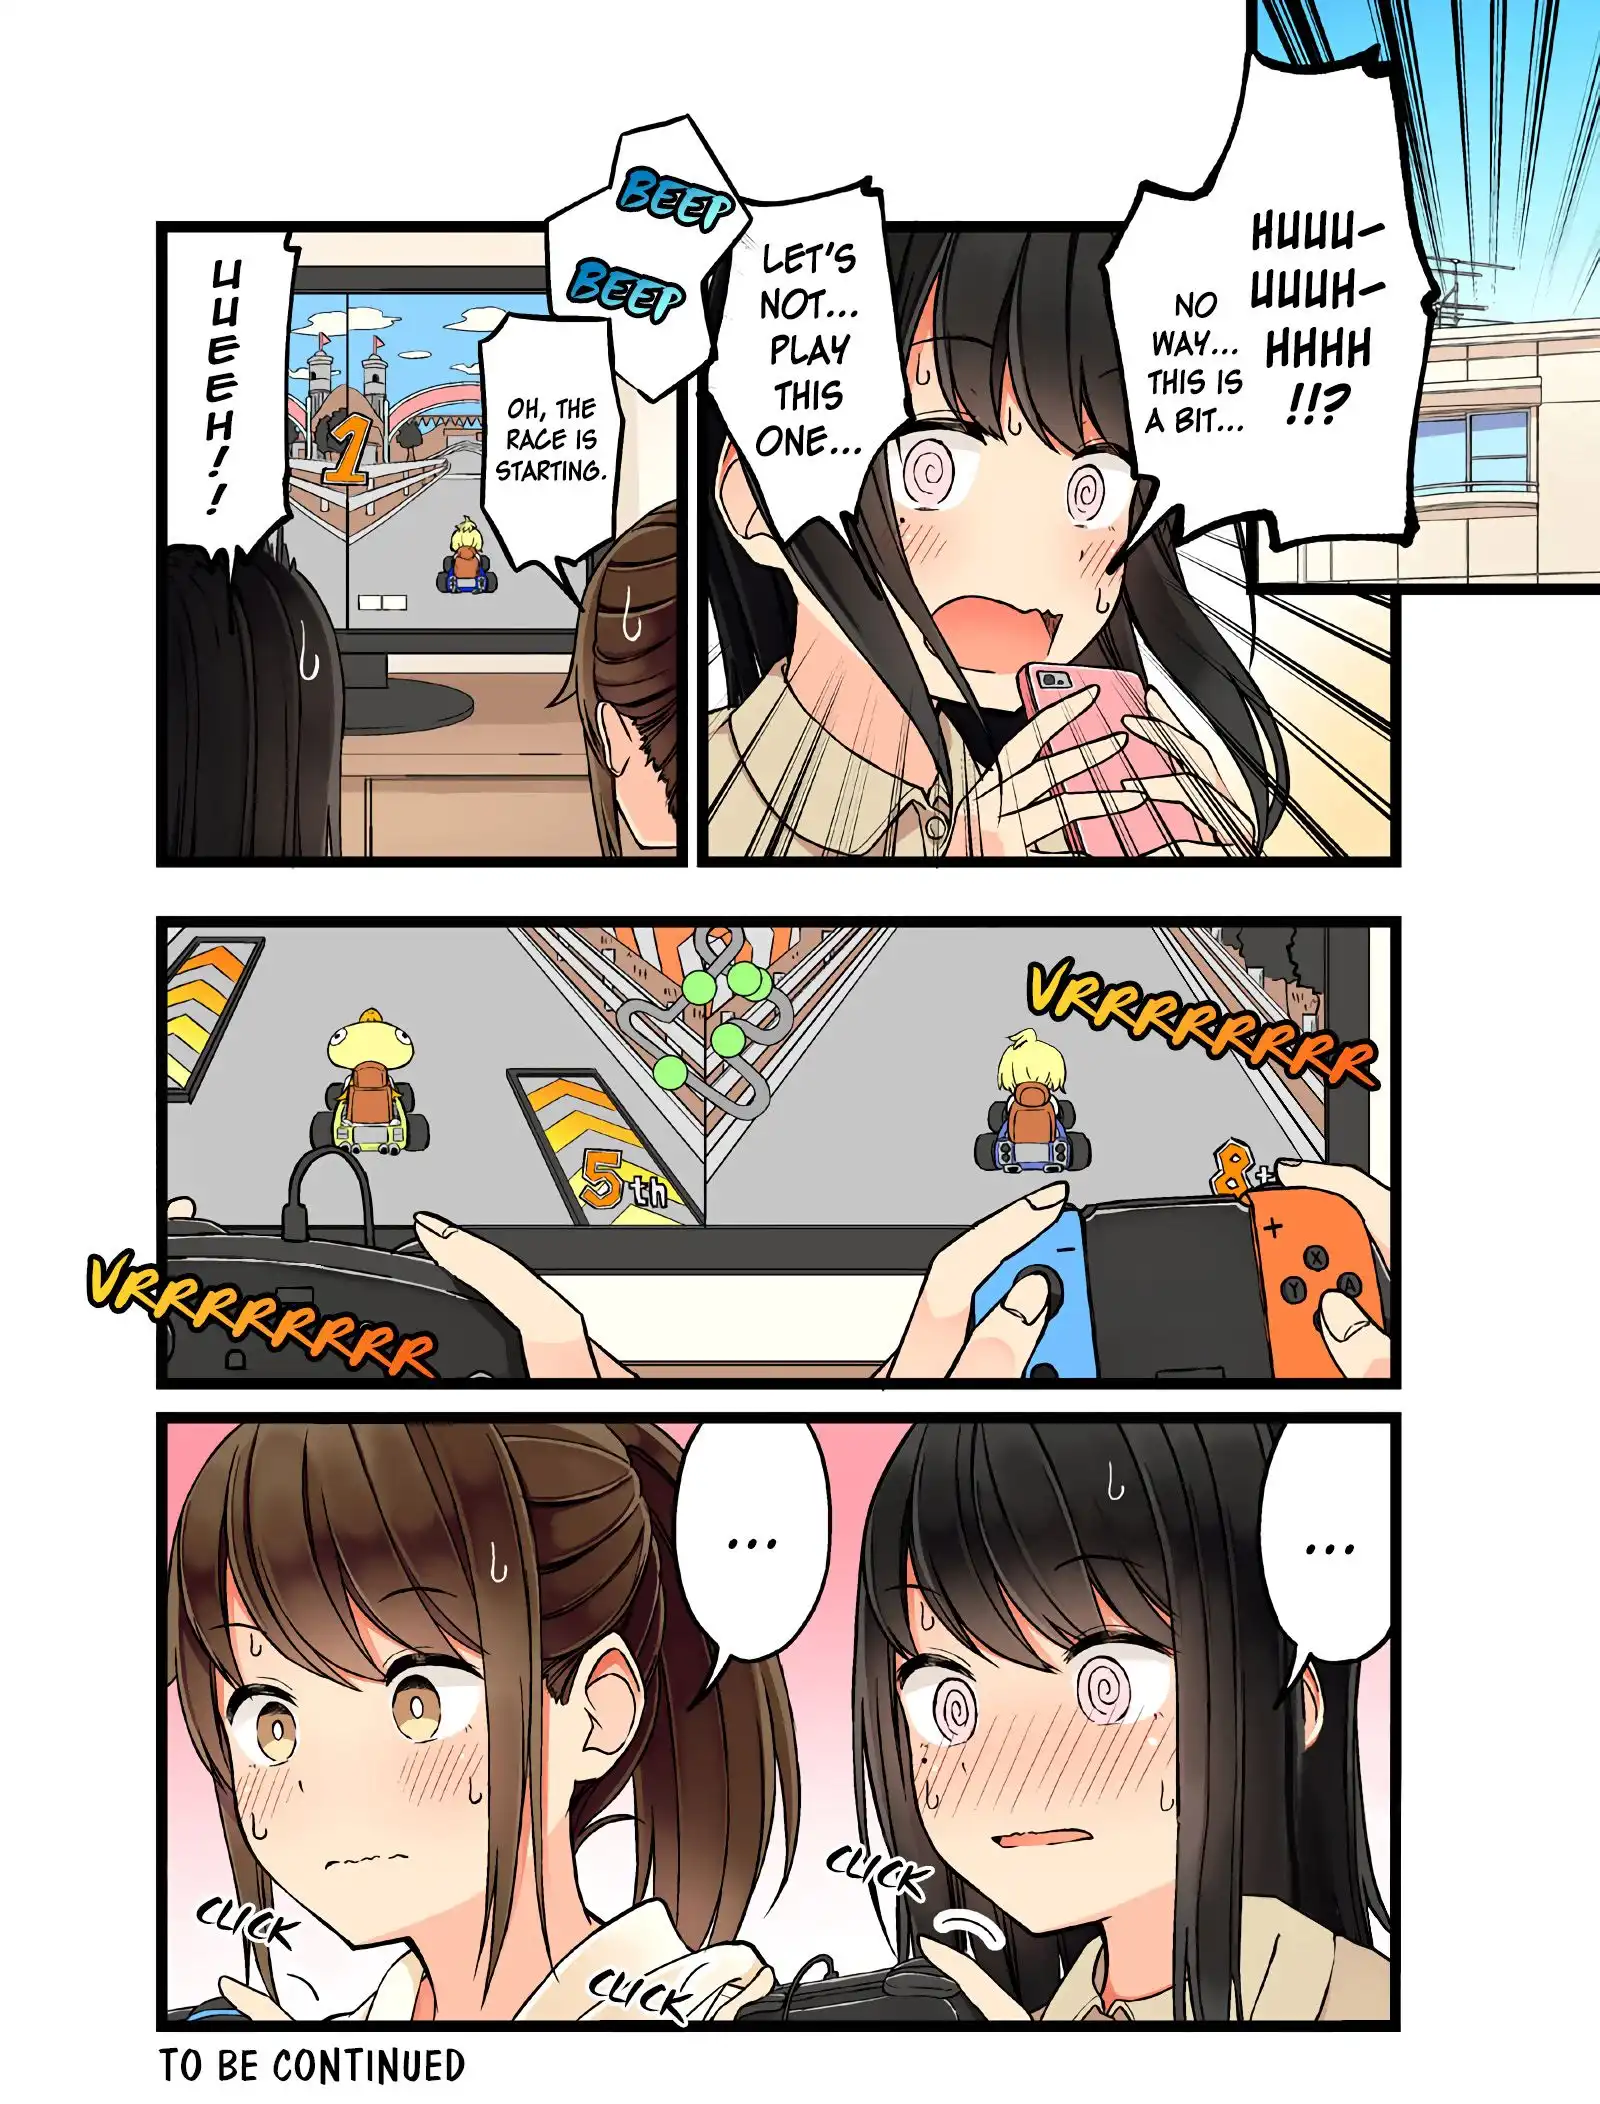 Hanging Out with a Gamer Girl Chapter 42